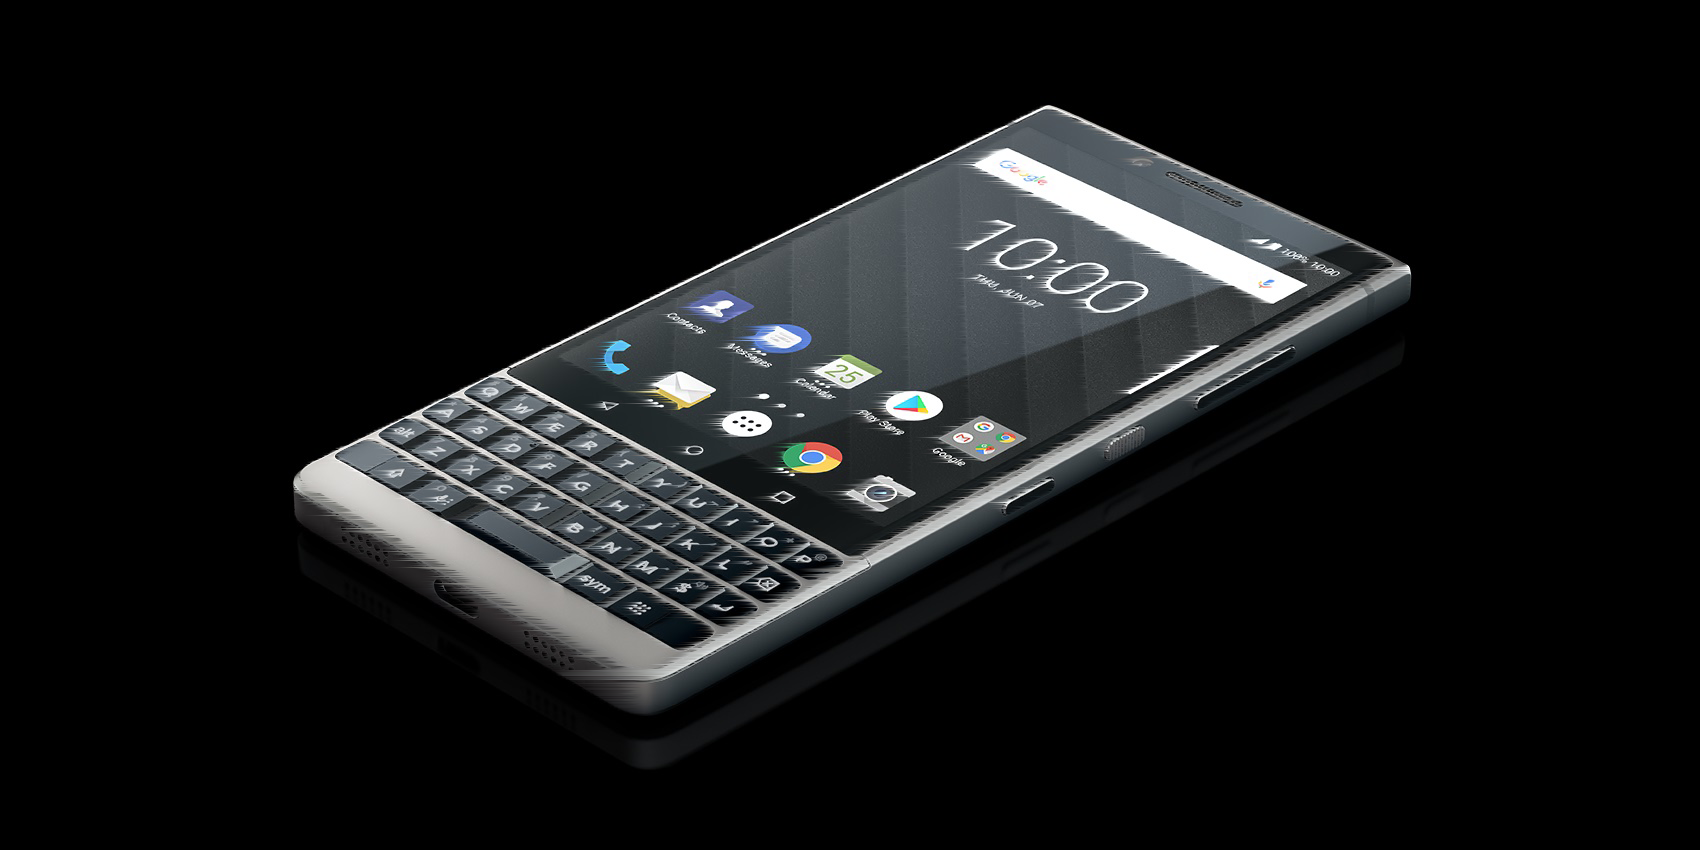 BlackBerry Phones May Be Dead (For Real This Time)